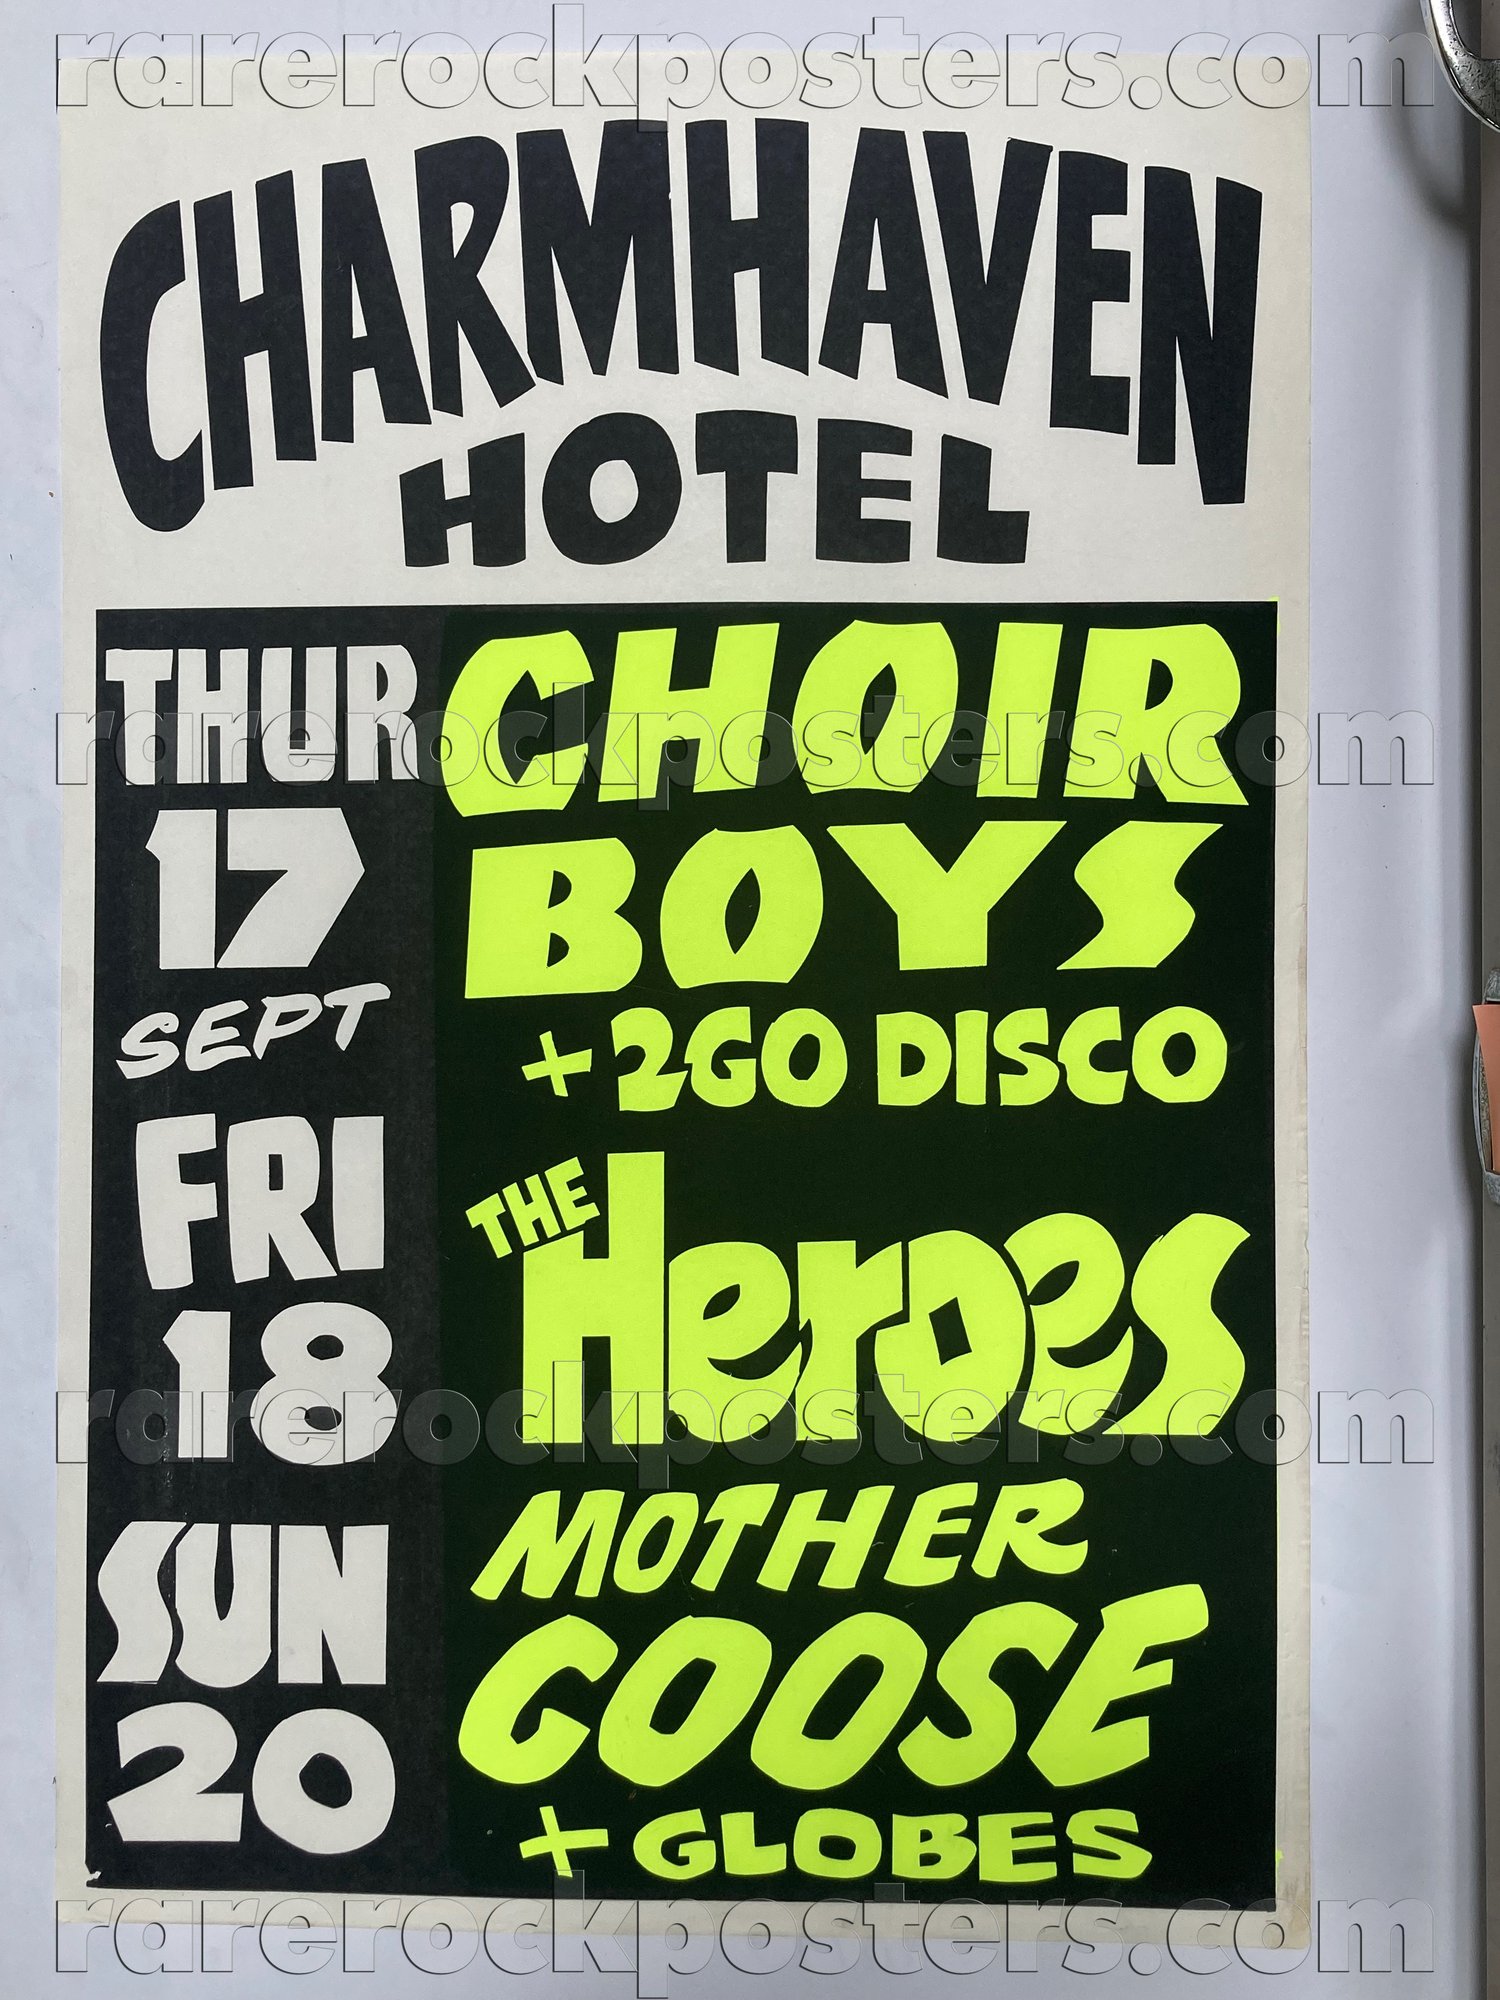 CHOIR BOYS / HEROES / MOTHER GOOSE / GLOBES ~ ORIG 1981 AUST GIG POSTER ~ CHARMHAVEN HOTEL